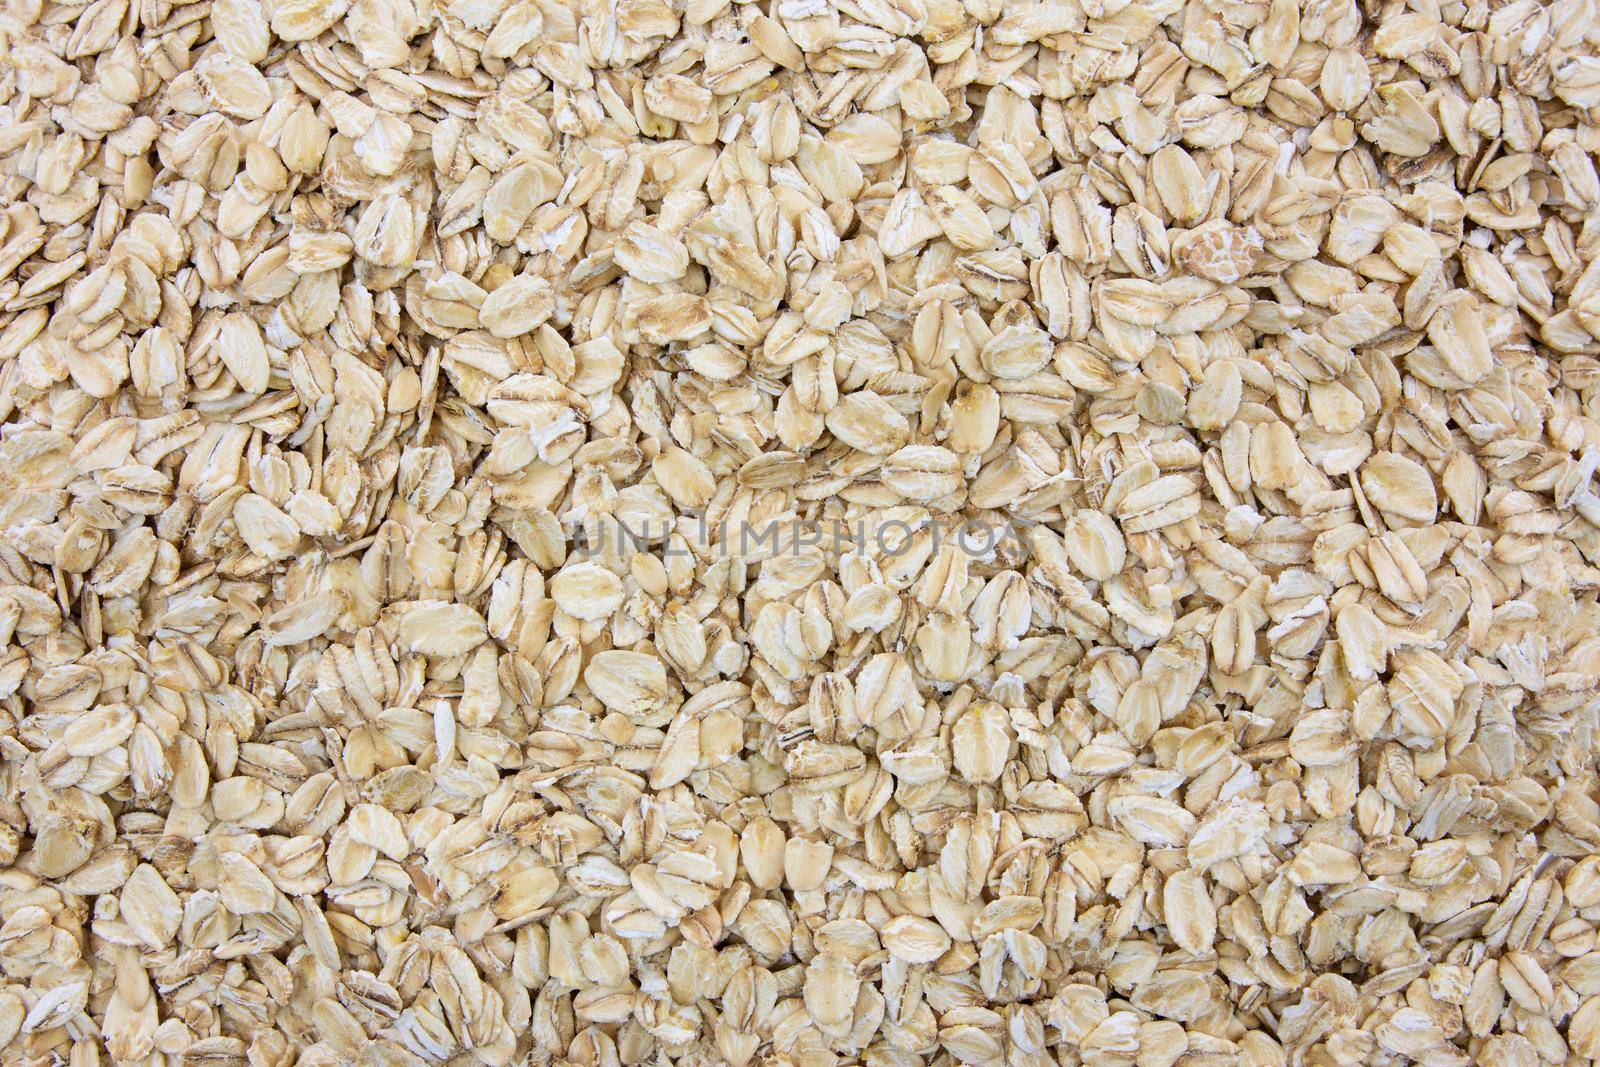 Background of dry rolled oats by wdnet_studio